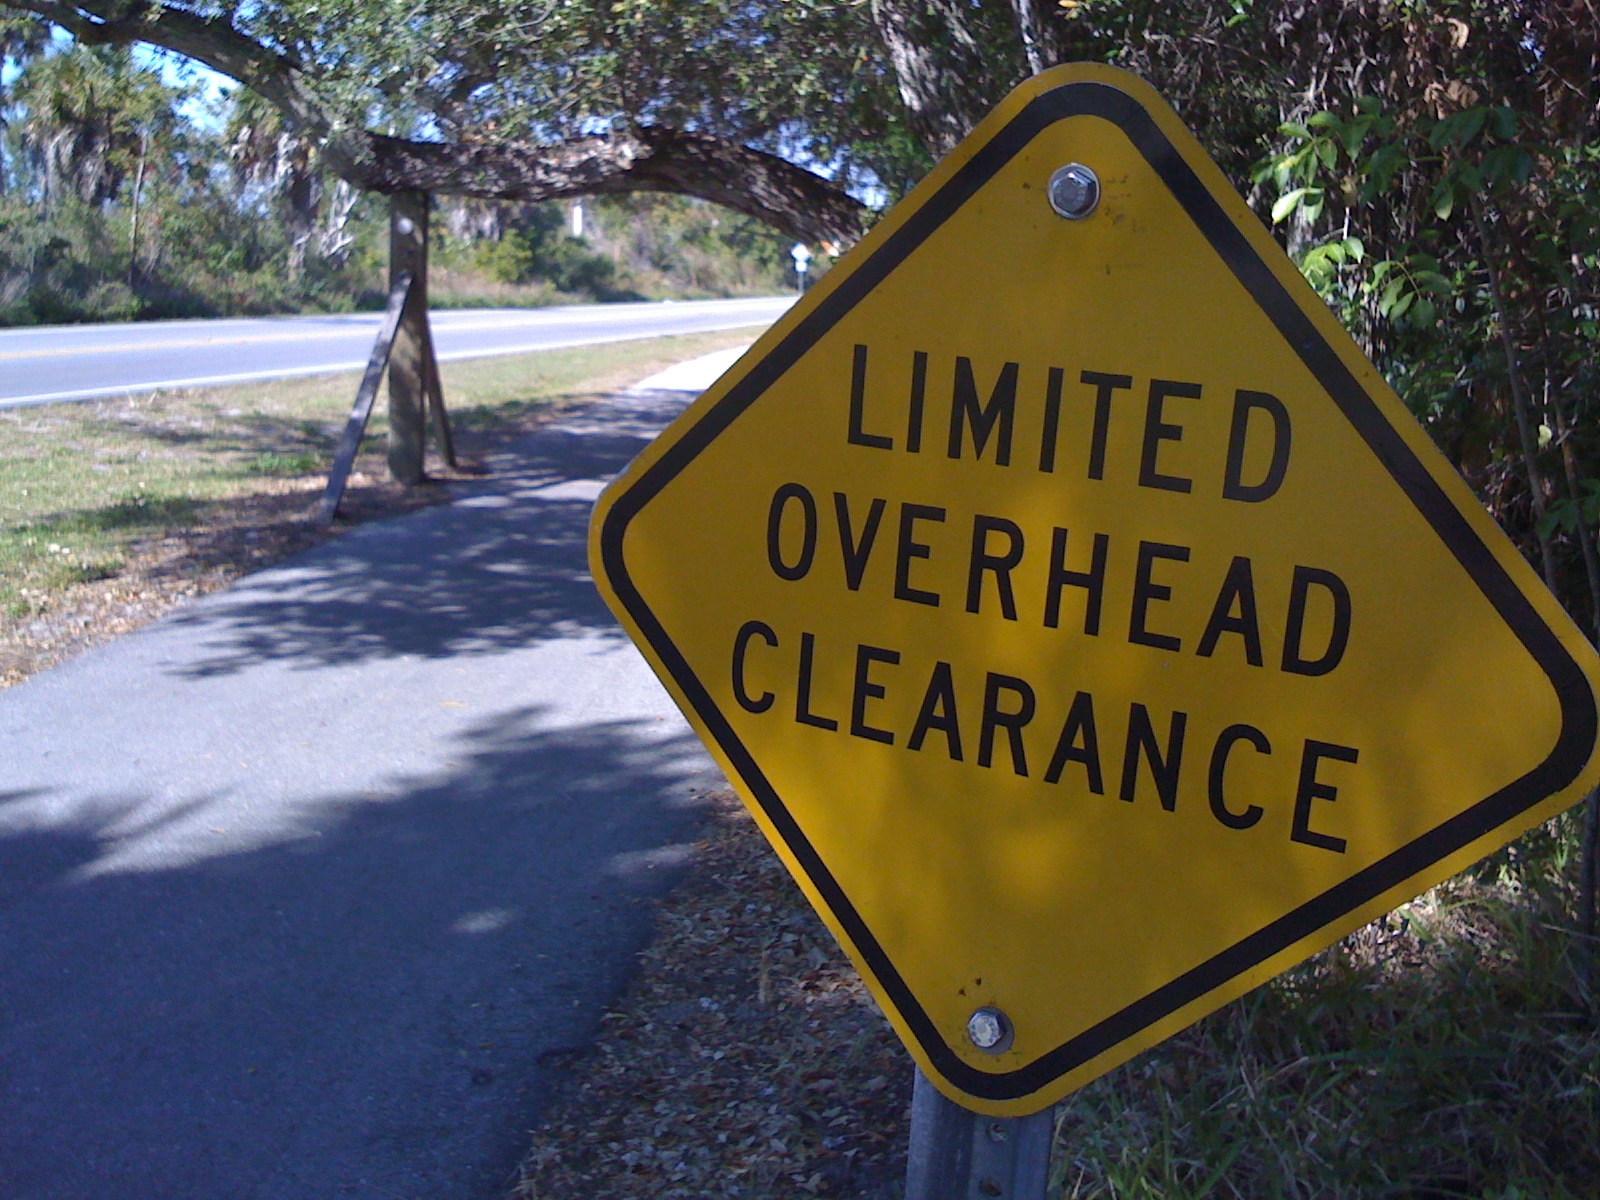 this sign shows an over head clearance on the side of the road